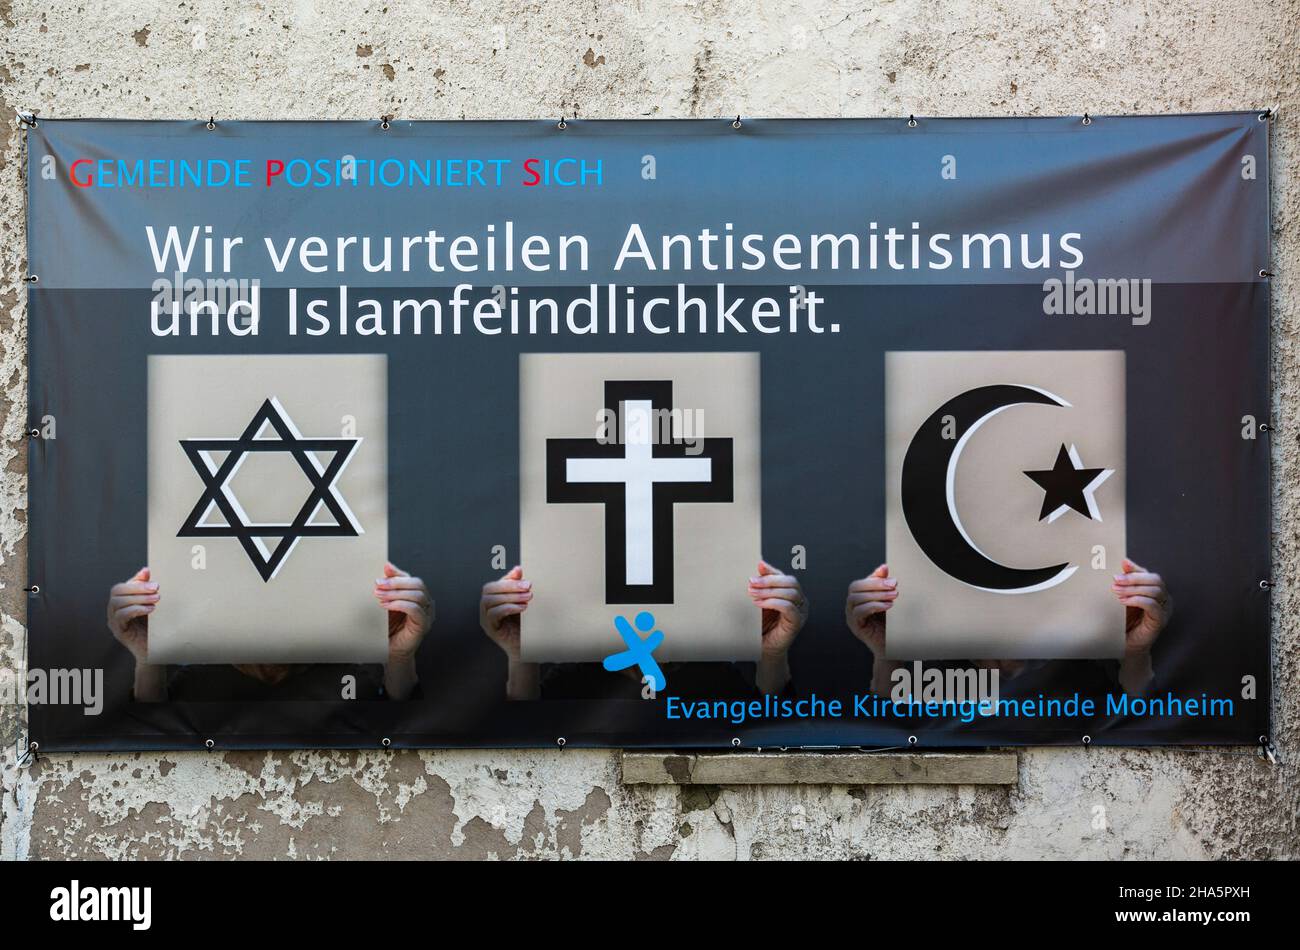 germany,society,religion,christian church,the evangelical church community of monheim am rhein condemned anti-semitism and islamophobia on a banner,the symbols for judaism and christianity and islam are arranged side by side as equals Stock Photo